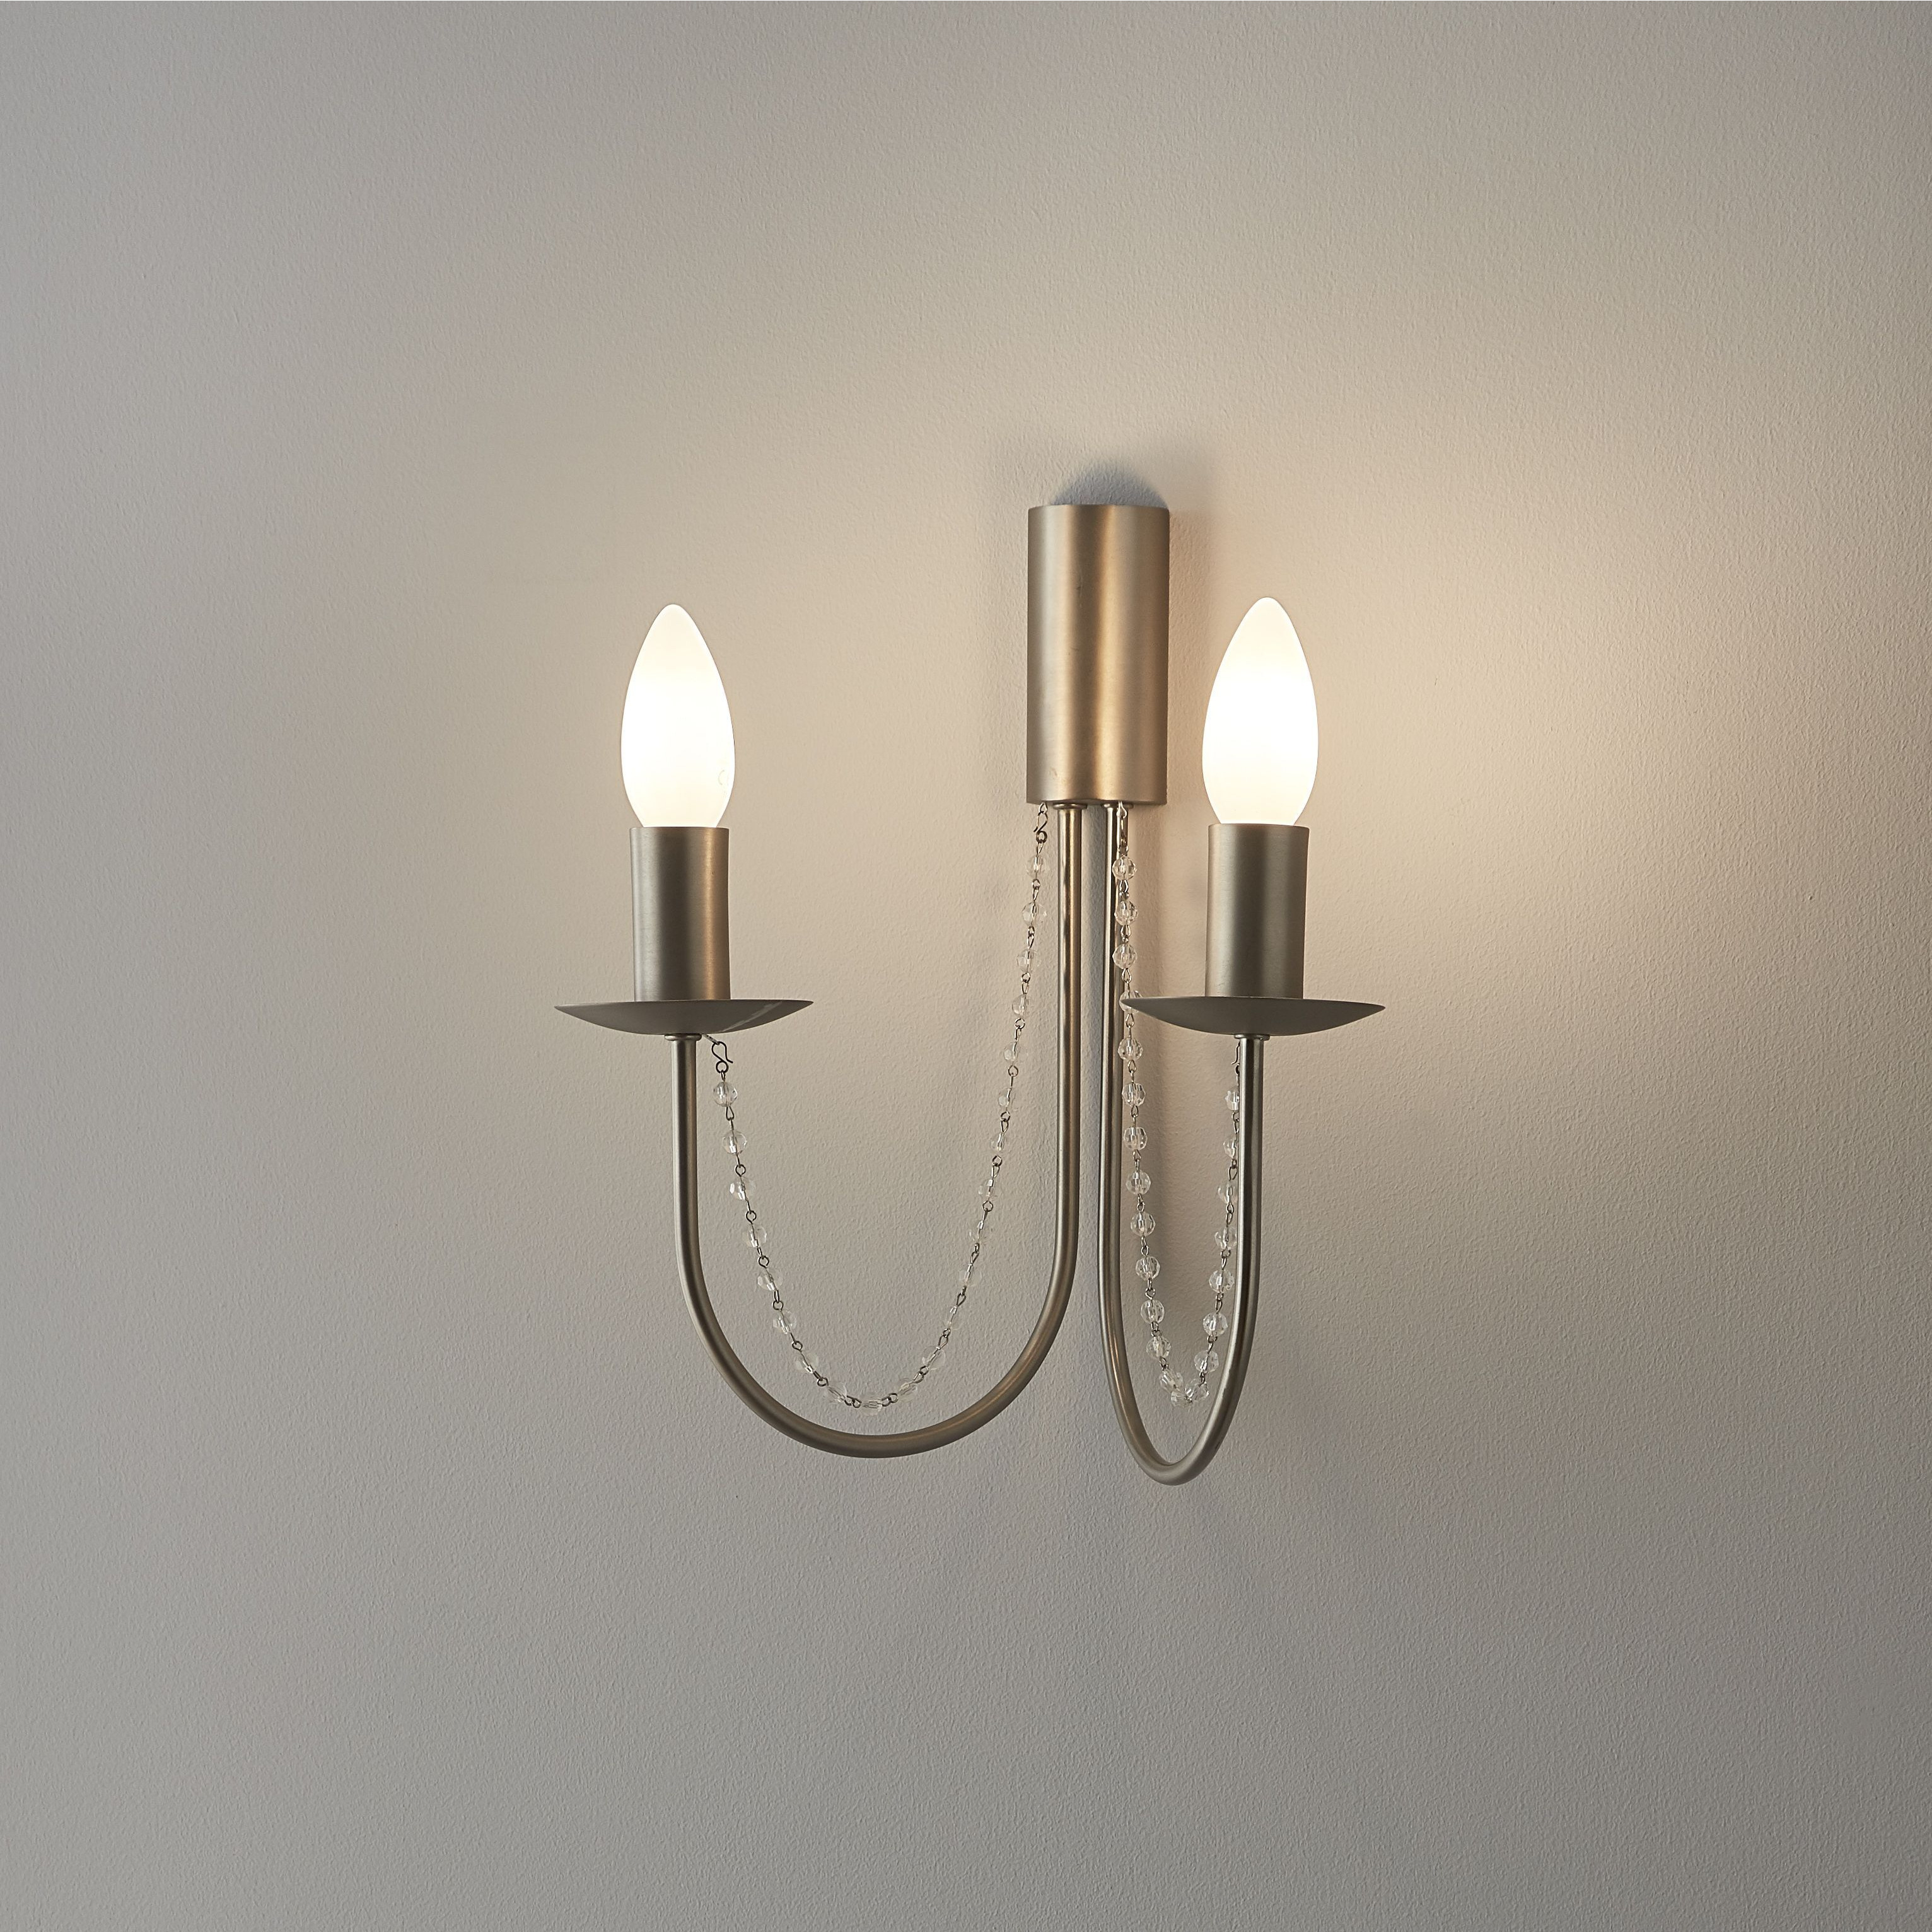 GoodHome Suhel Chrome Effect Double Wall Light